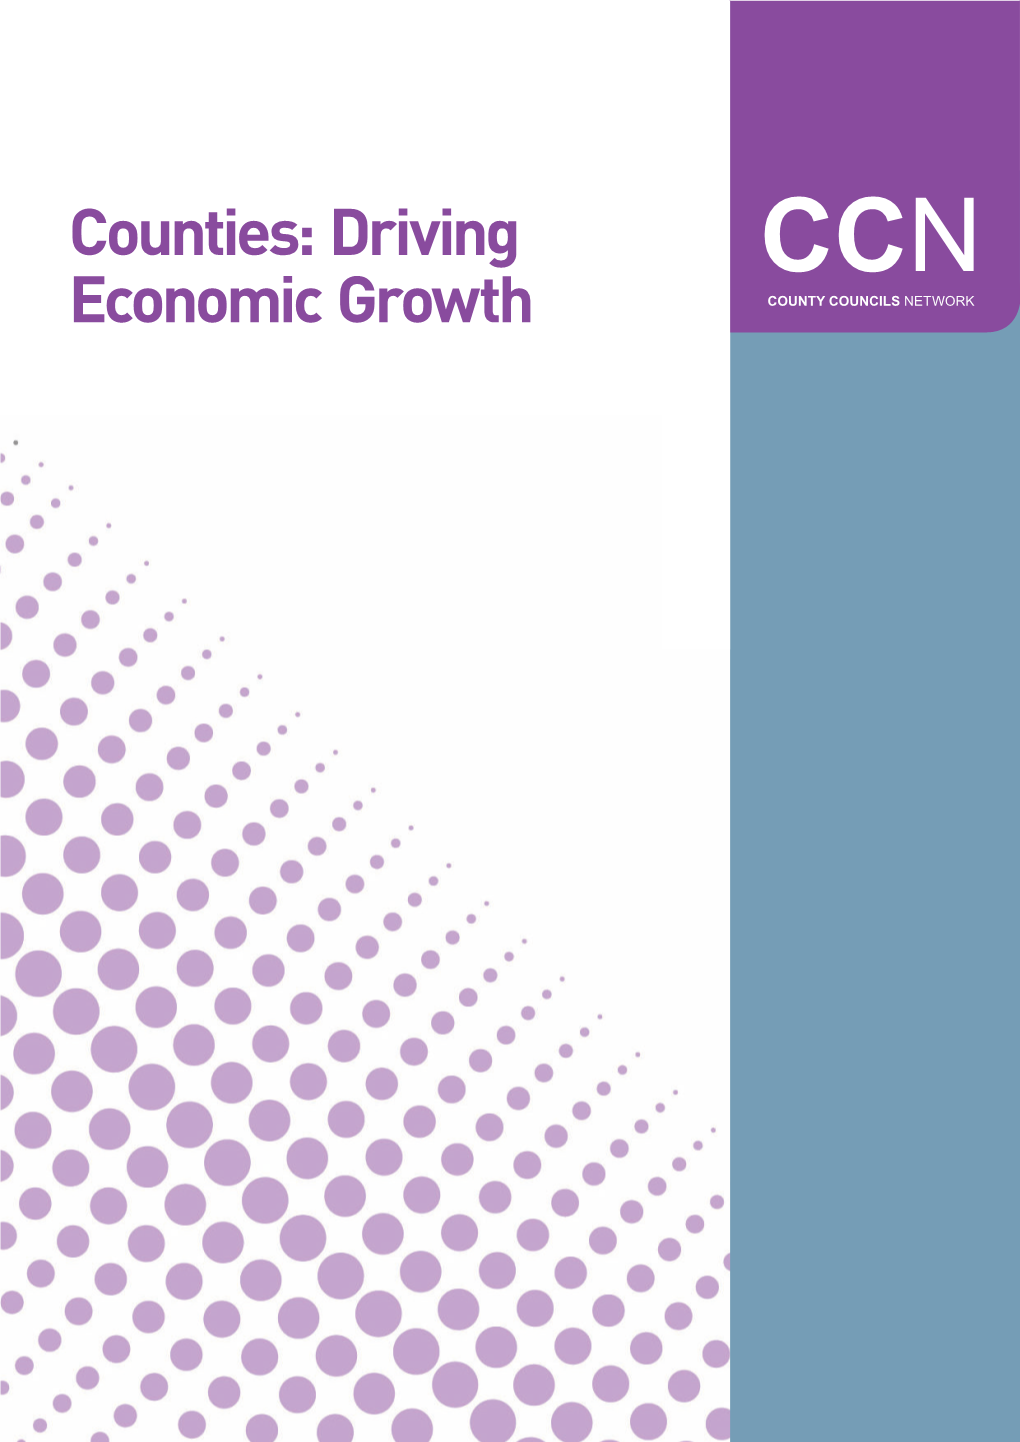 Counties: Driving Economic Growth Contents